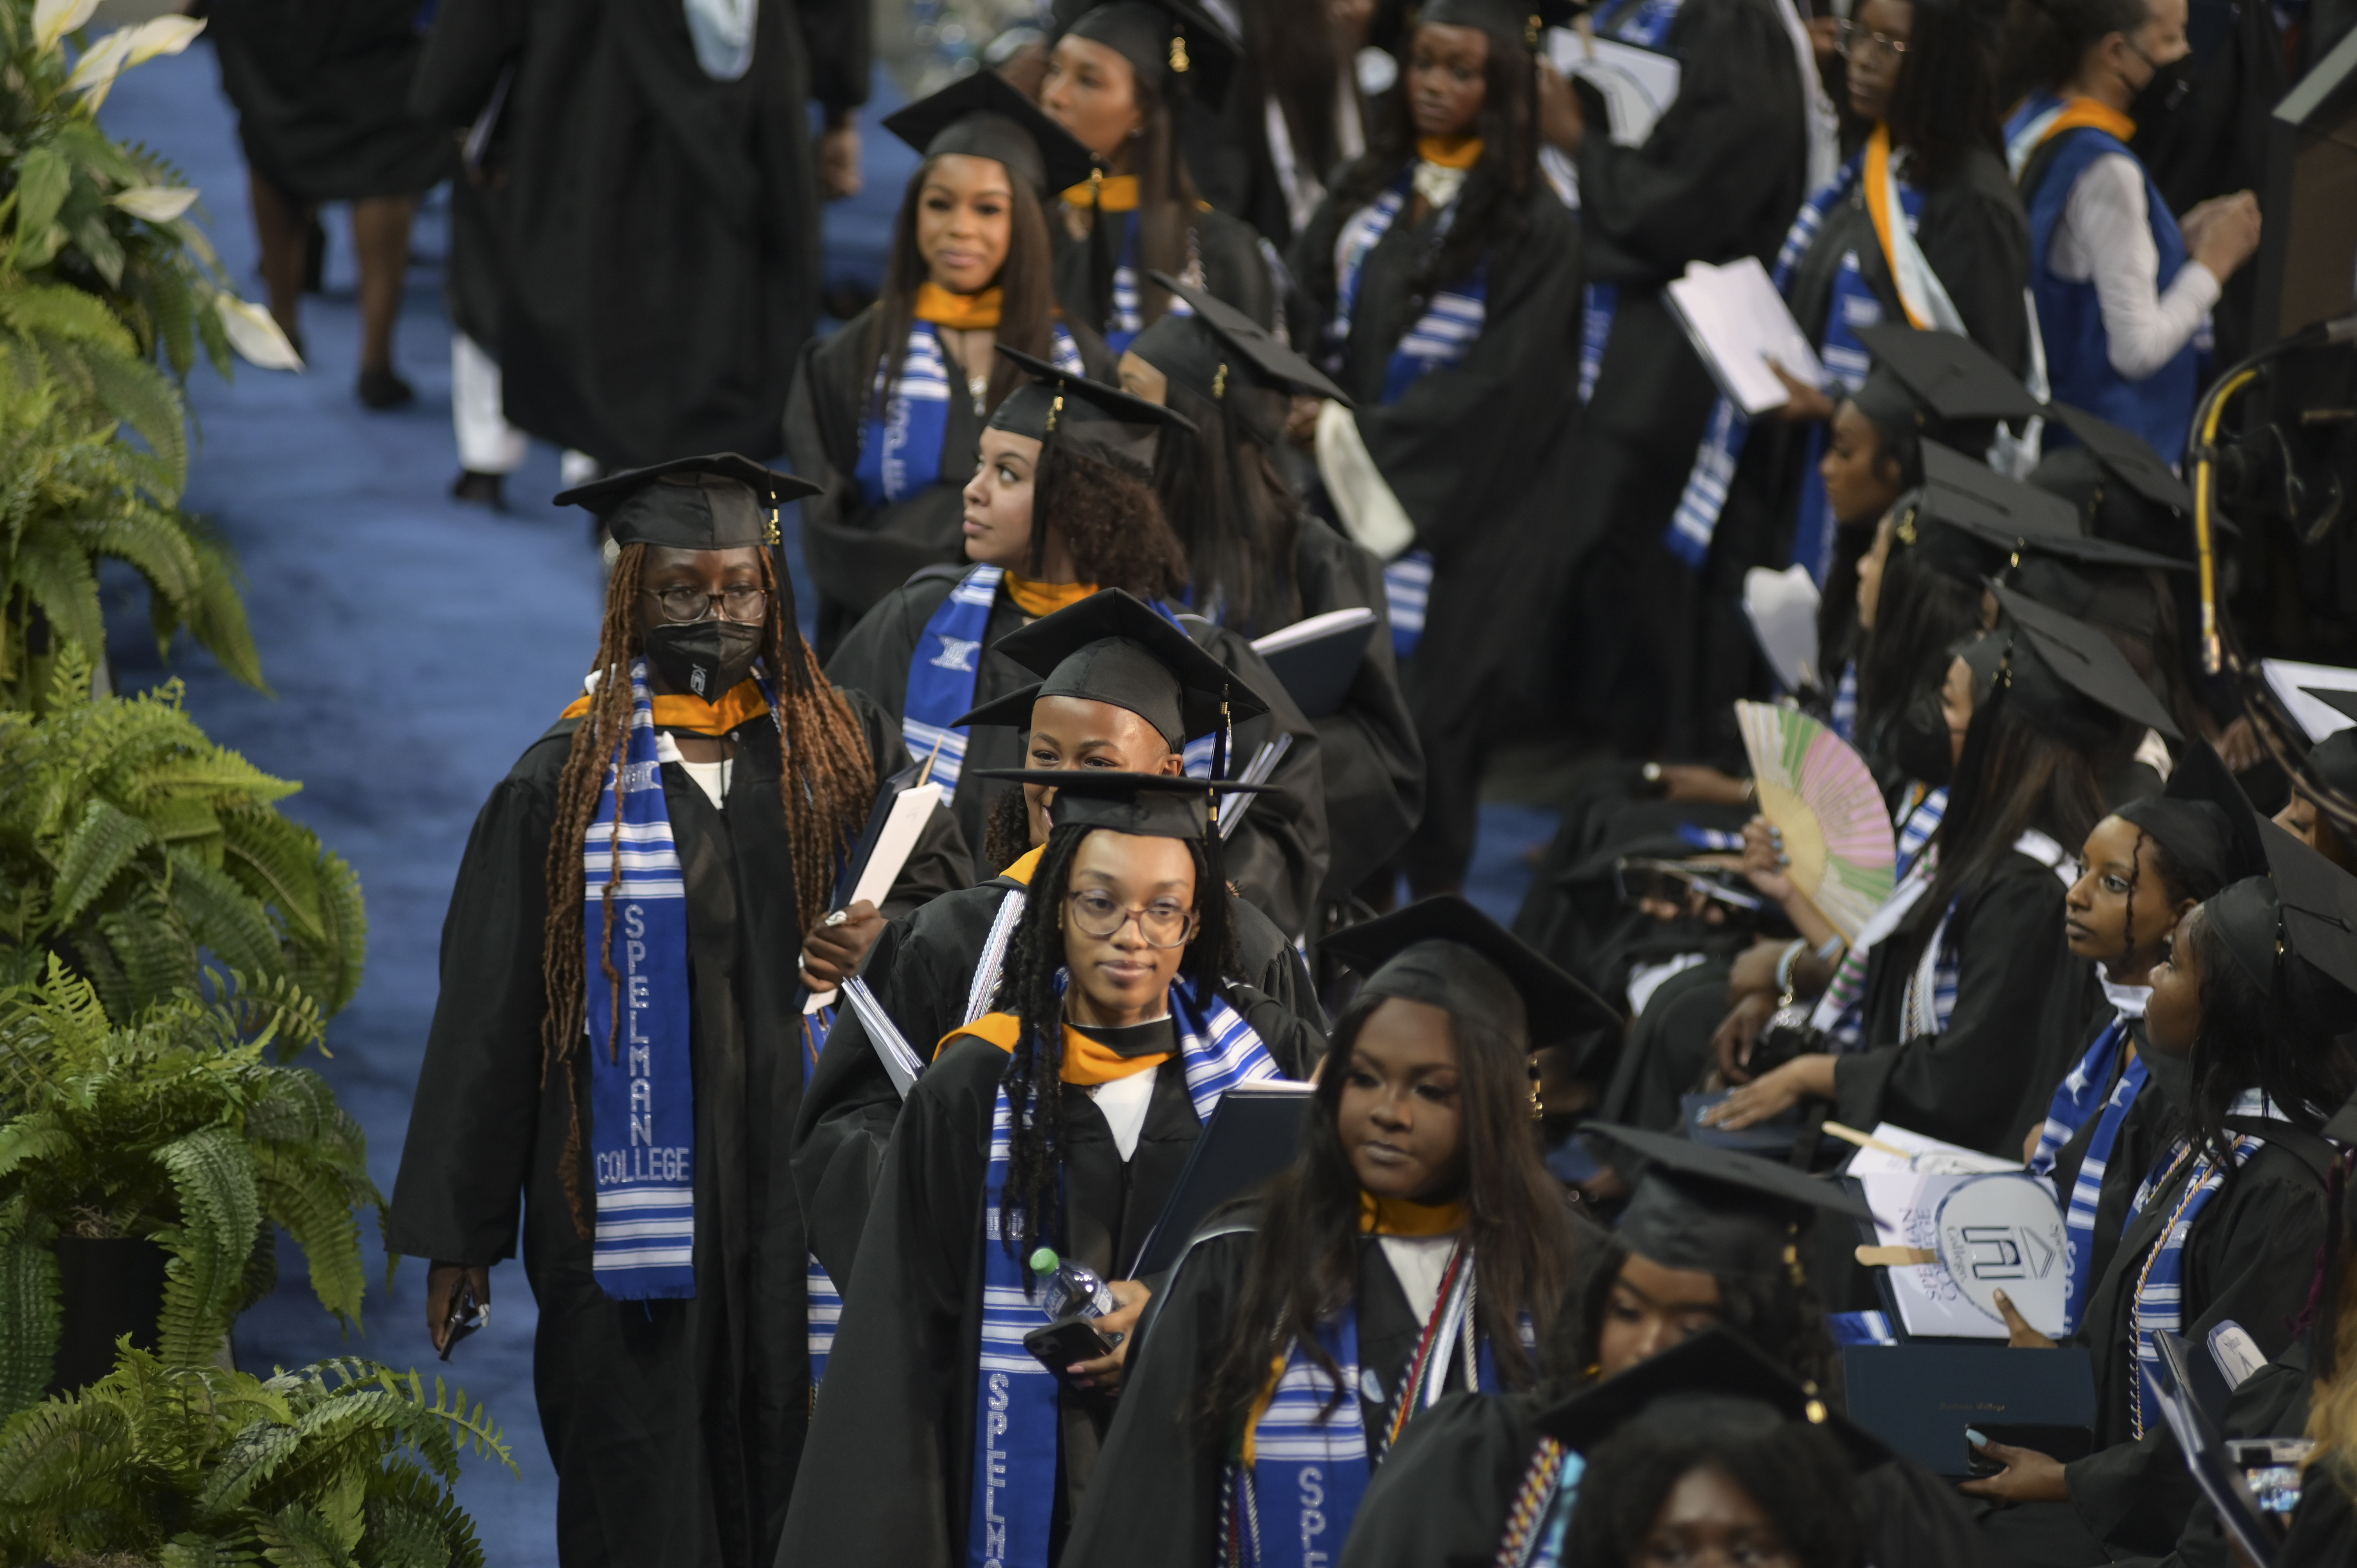 Spelman graduates exit the 2022 Spring Commencement at McCamish Pavilion in Atlanta on Sunday May 15, 2022. (Natrice Miller / natrice.miller@ajc.com)